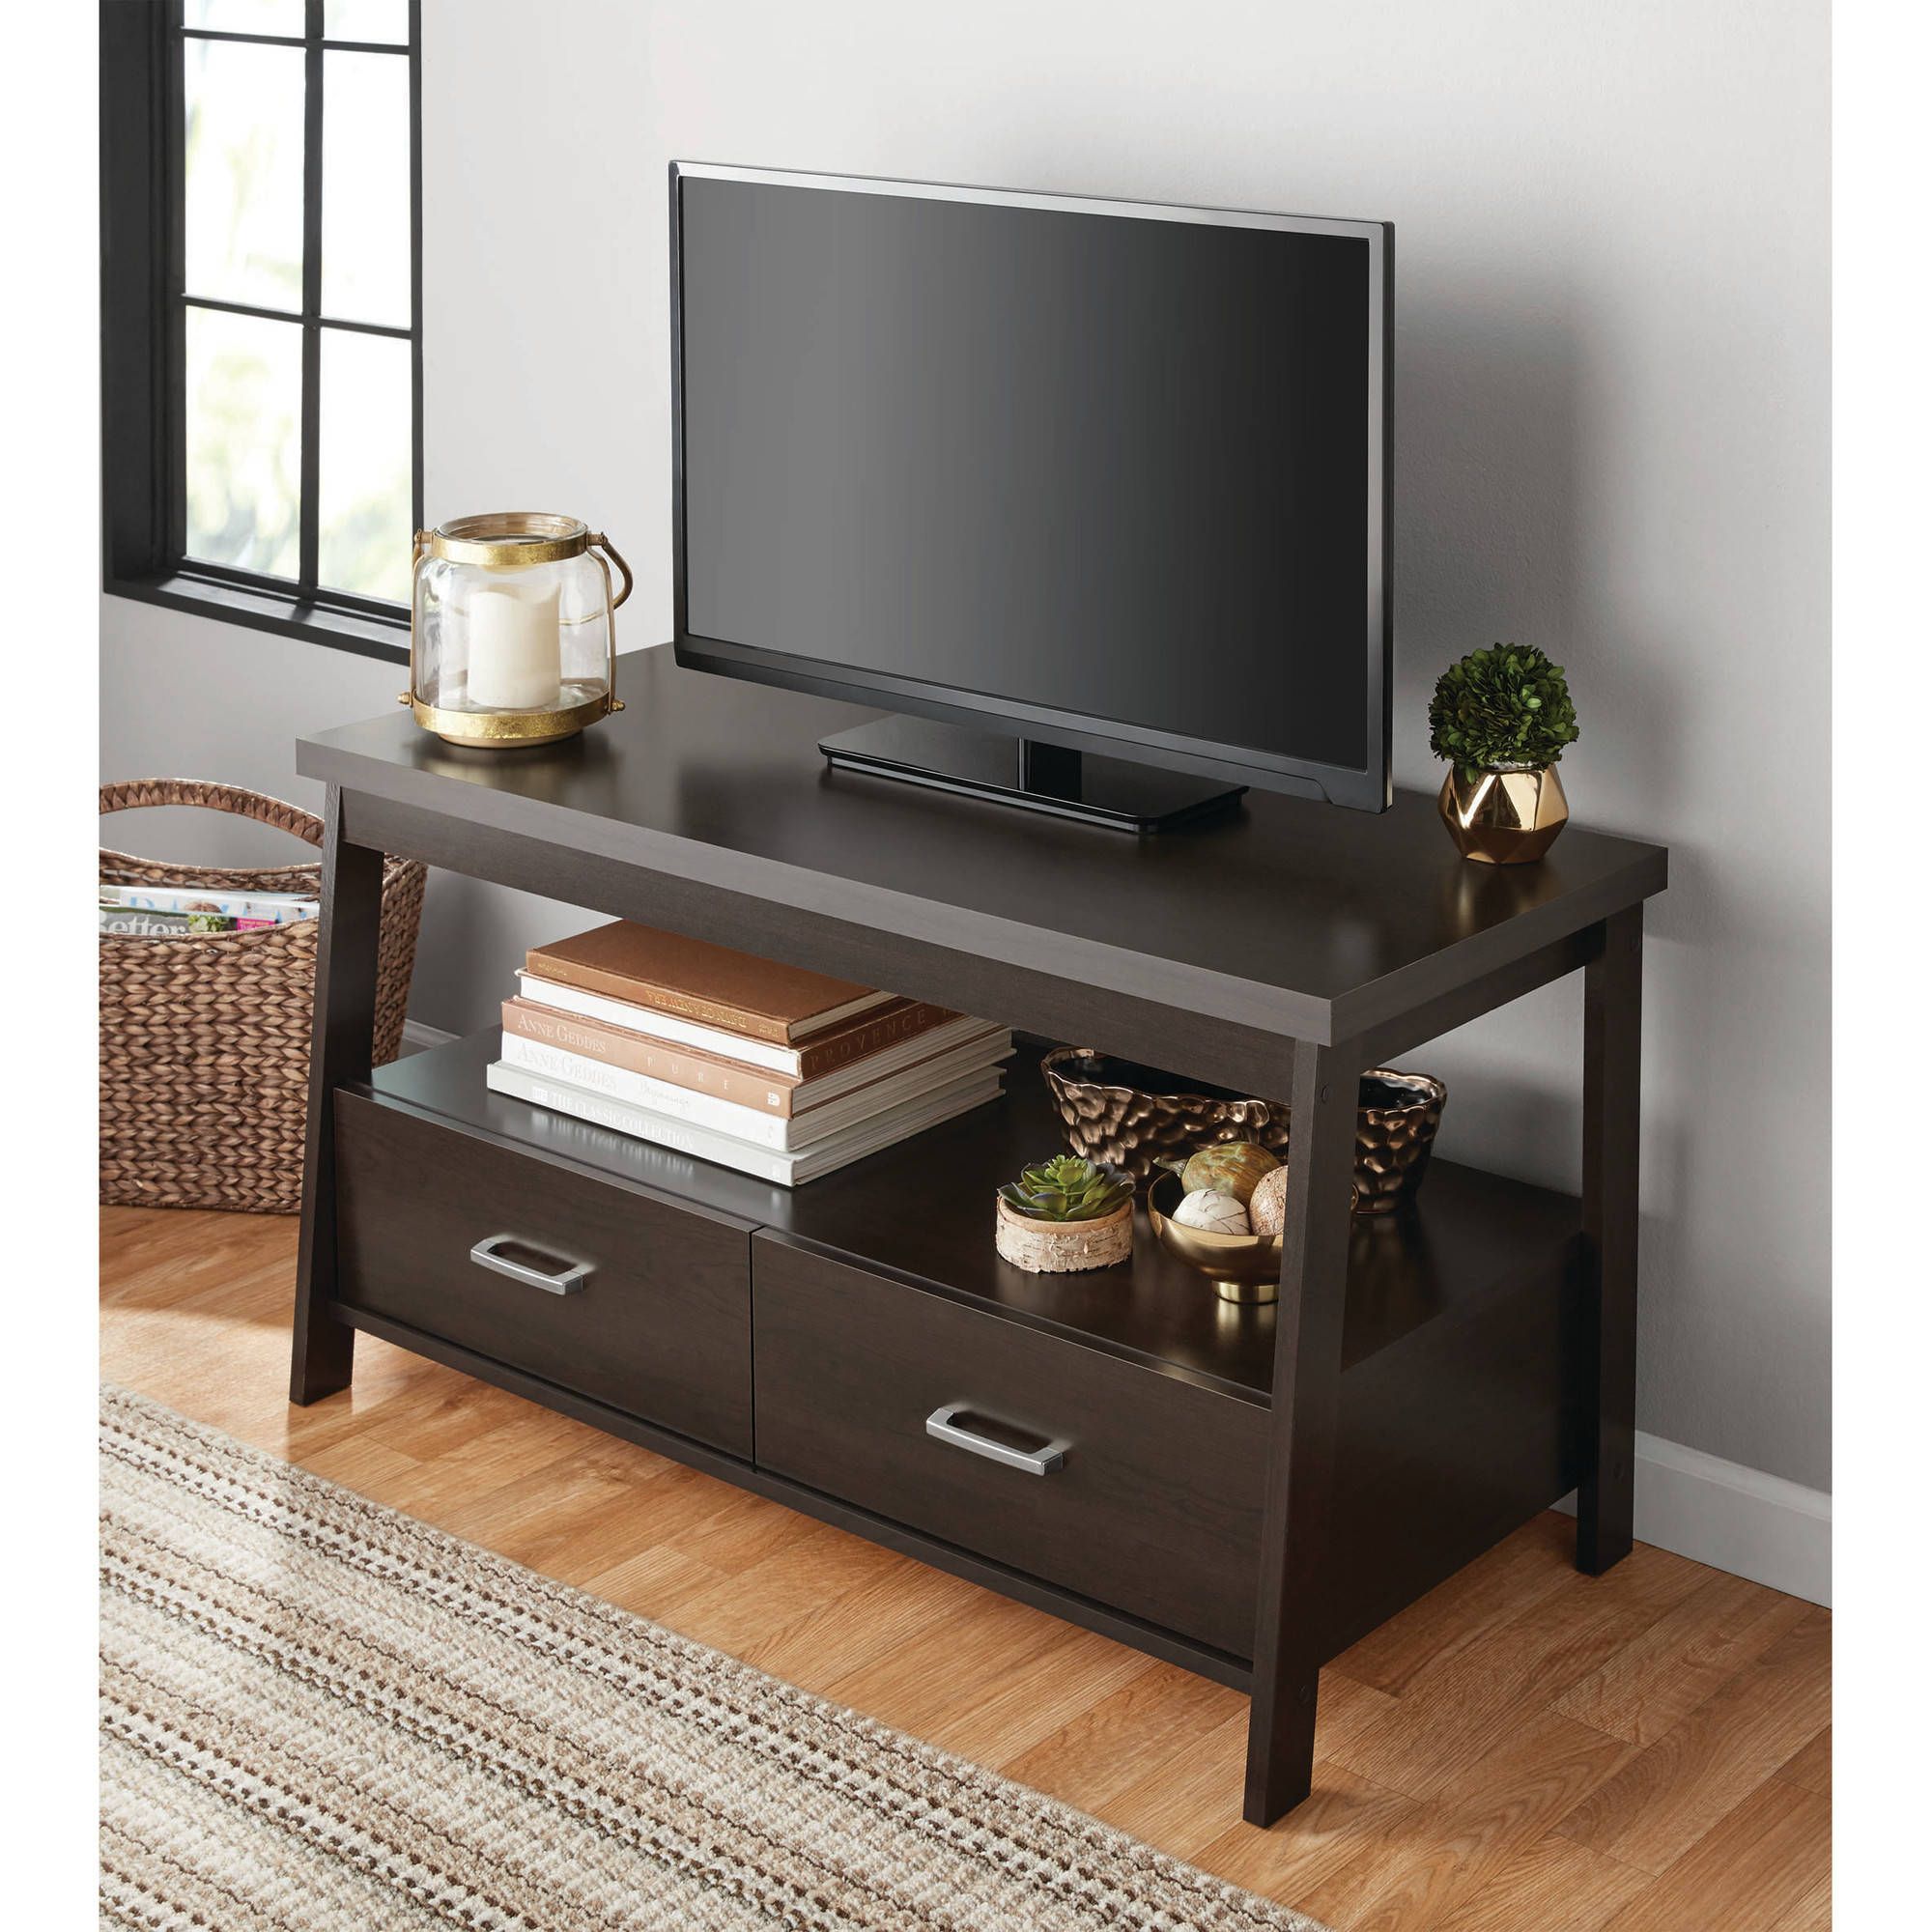 Mainstays Logan Tv Stand For Tvs Up To 47" Multiple For Tv Stands With Led Lights In Multiple Finishes (View 2 of 15)